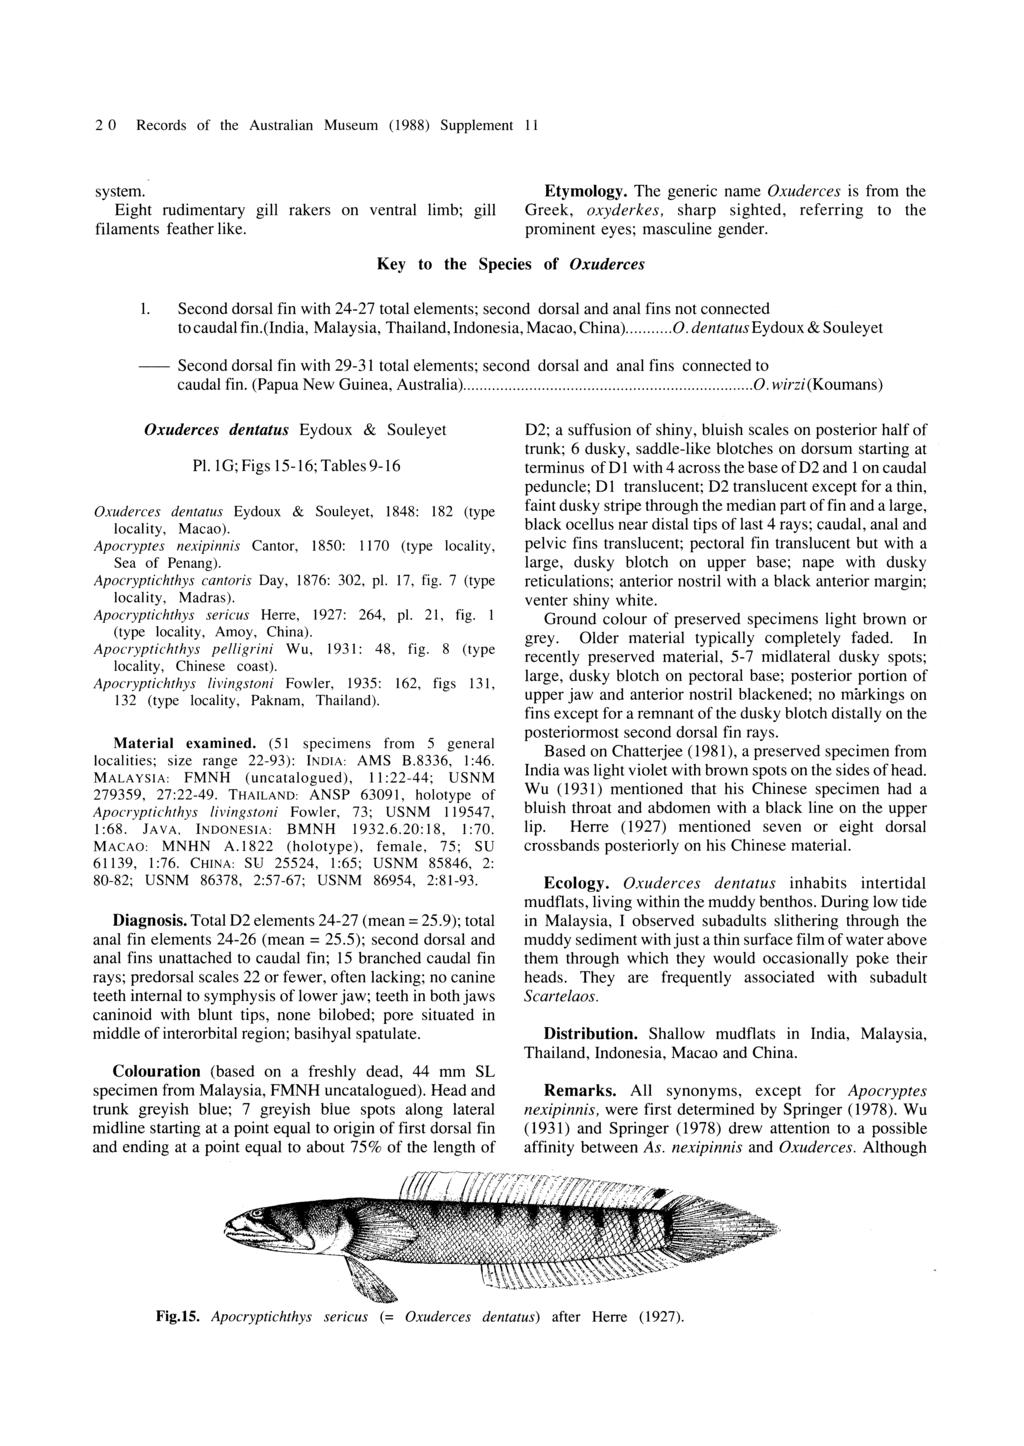 20 Records of the Australian Museum (1988) Supplement 11 system. Eight rudimentary gill rakers on ventral limb; gill filaments feather like. Etymology.